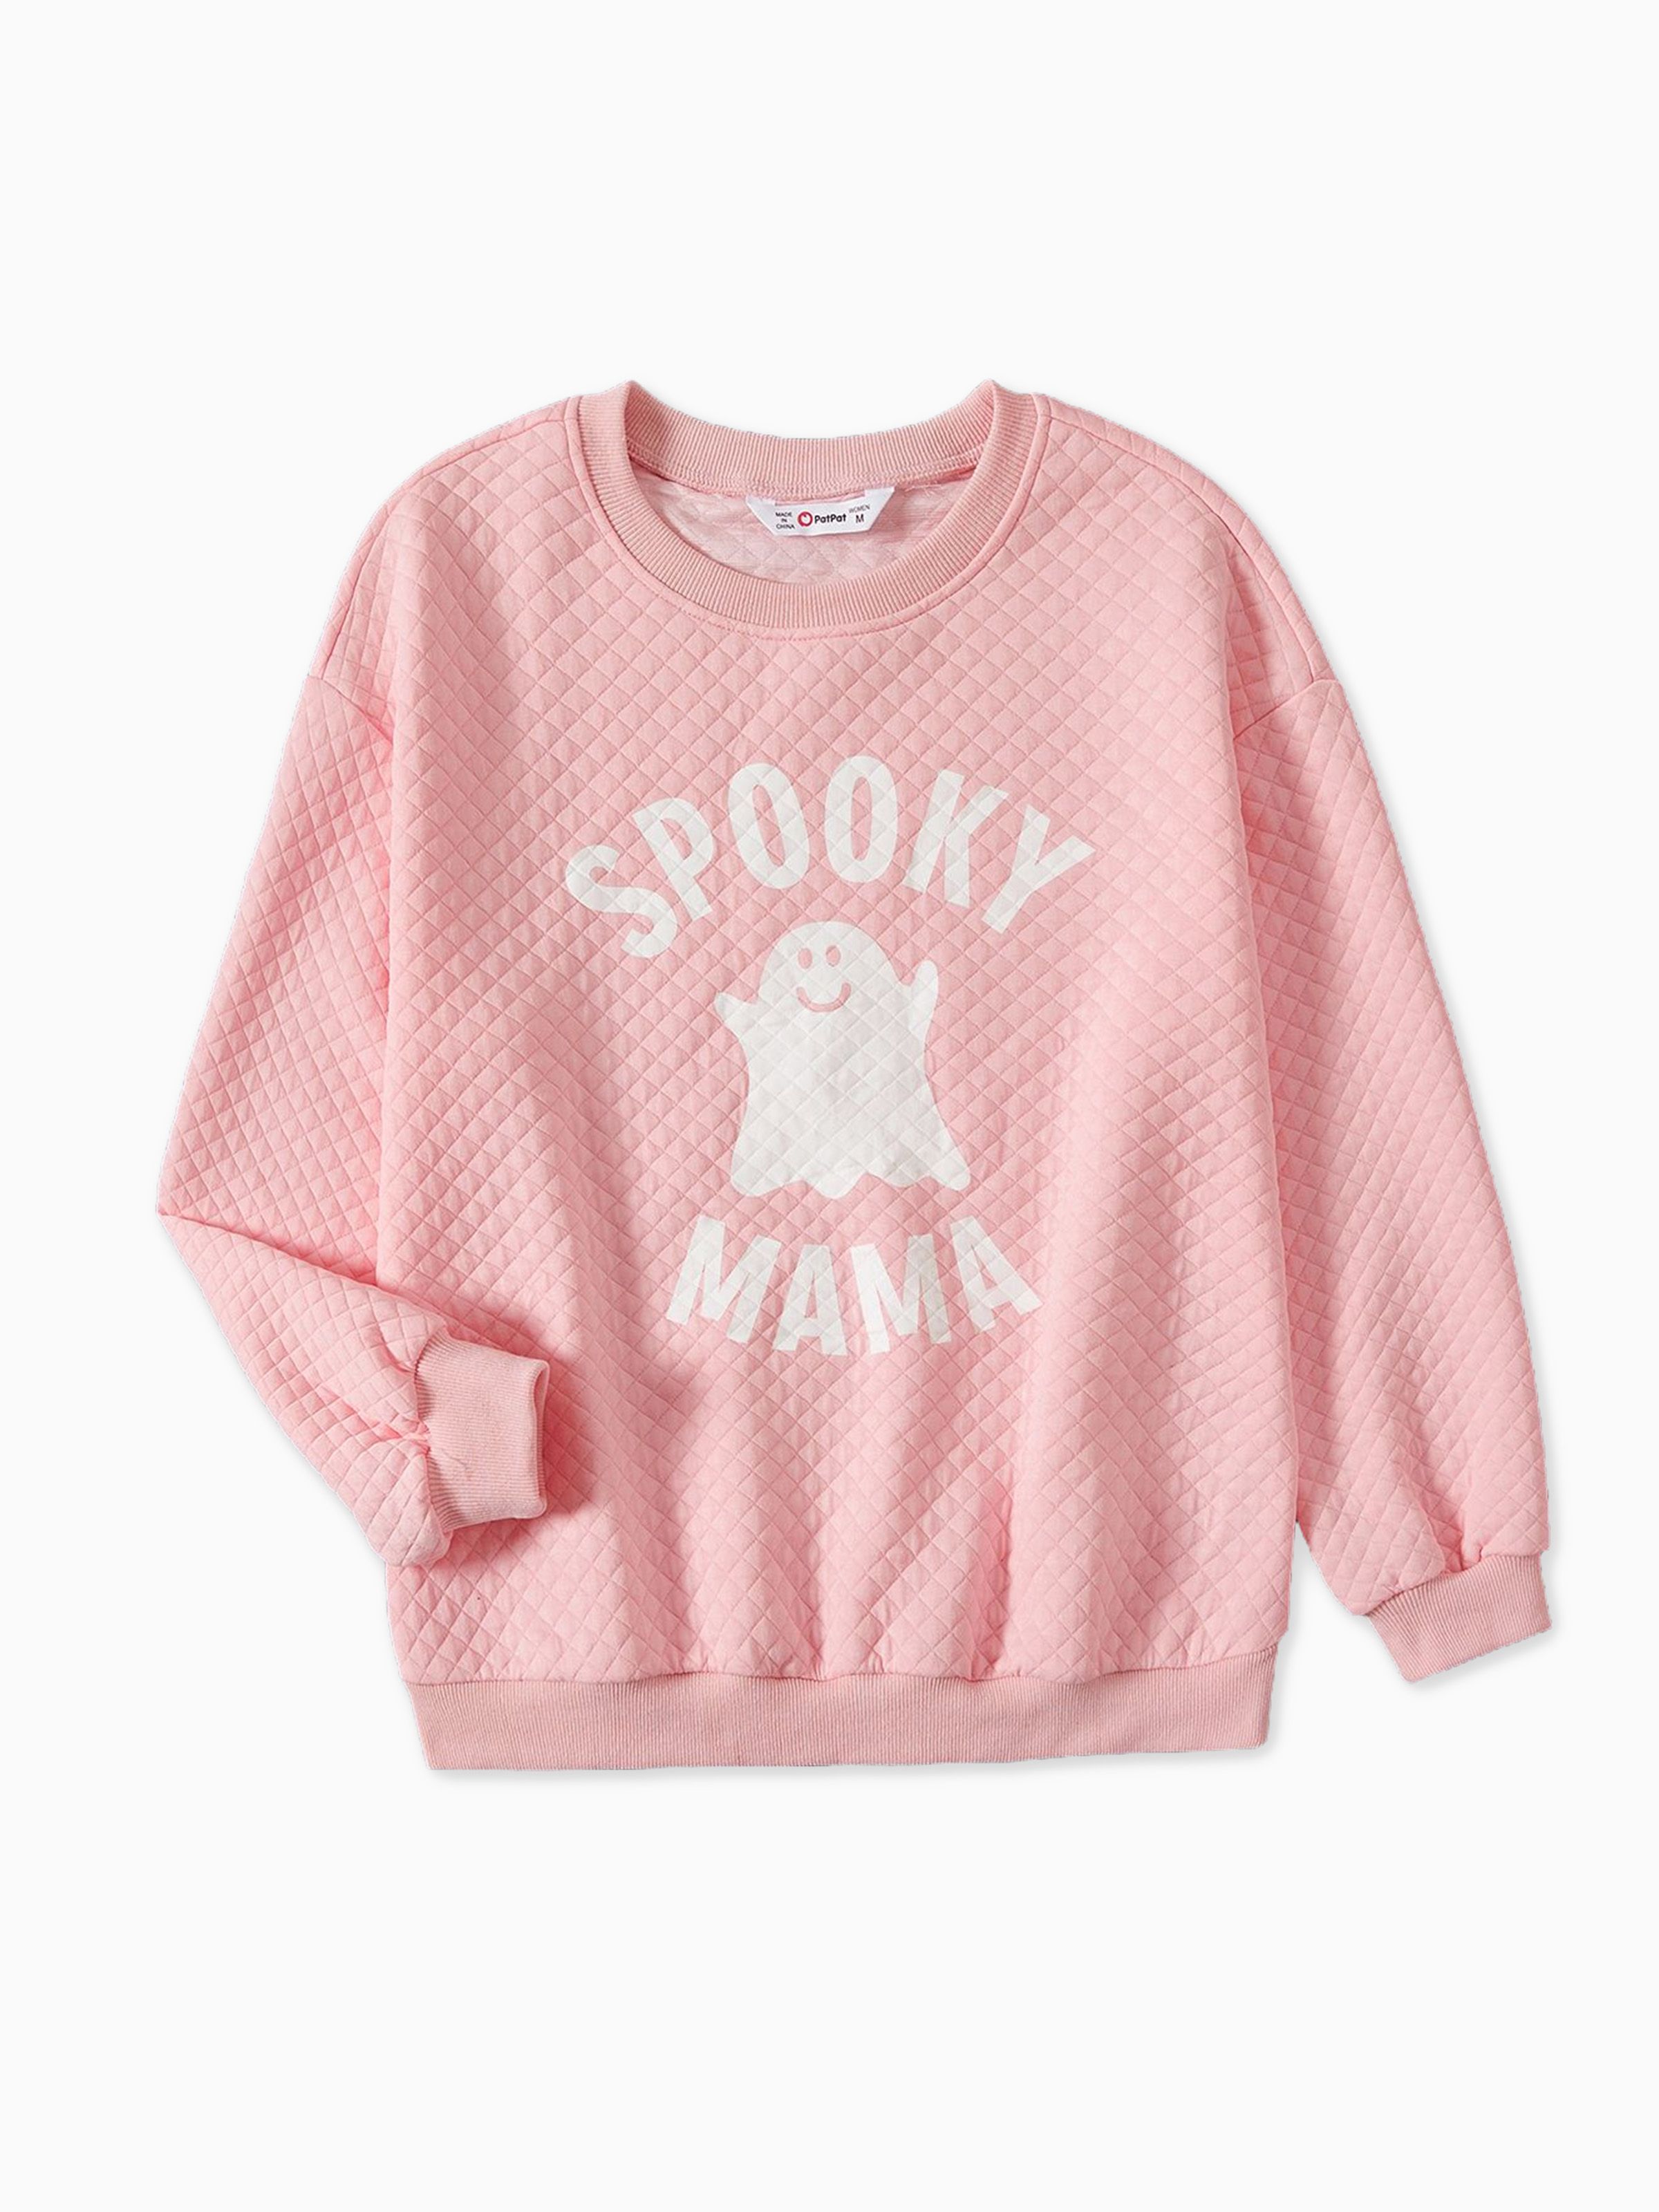 

Halloween Family Matching Glow in the Dark Pink Letter & Ghost Print Tops